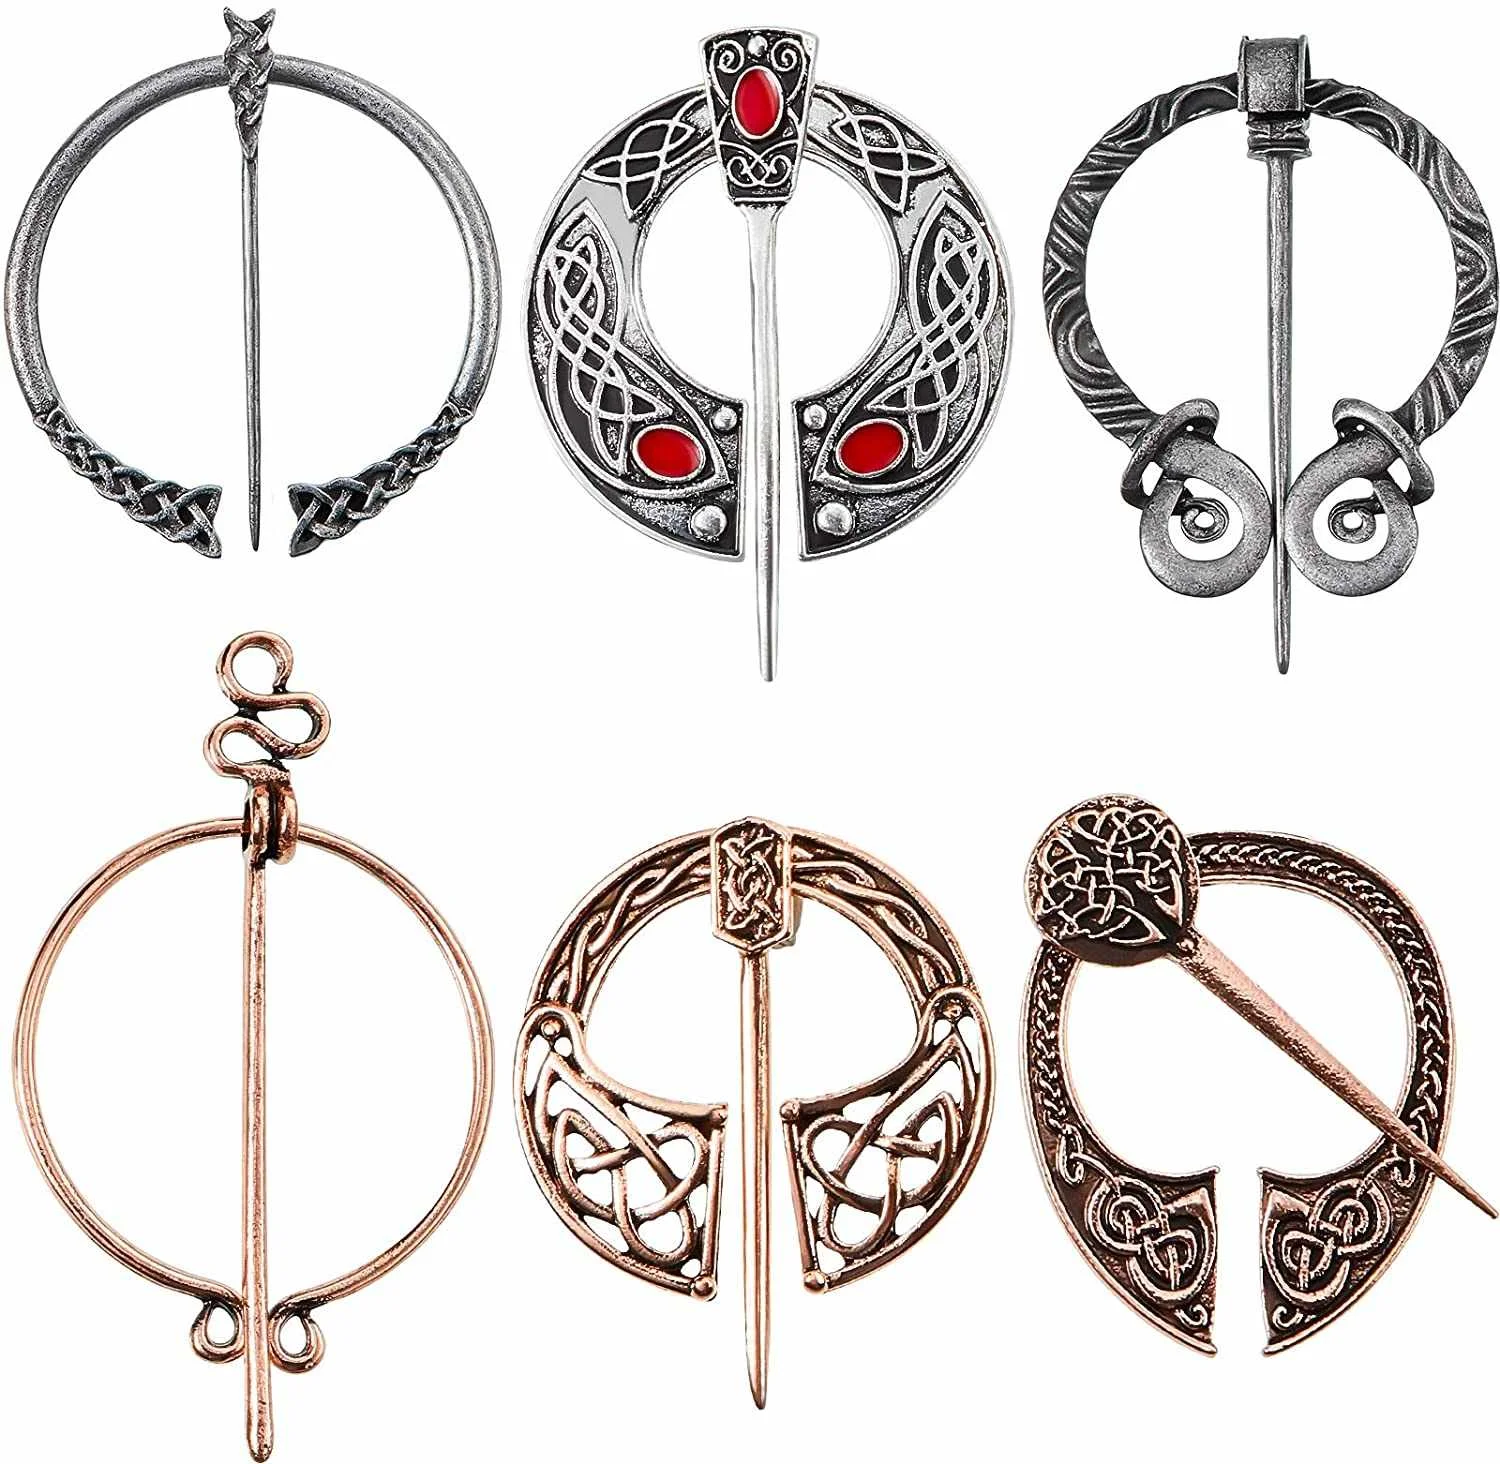 

6 Pieces Vintage Viking Brooch Cloak Pin Scarf Shawl Clasp Penannular Brooch for Costume Accessory Antique Silver Rose Gold